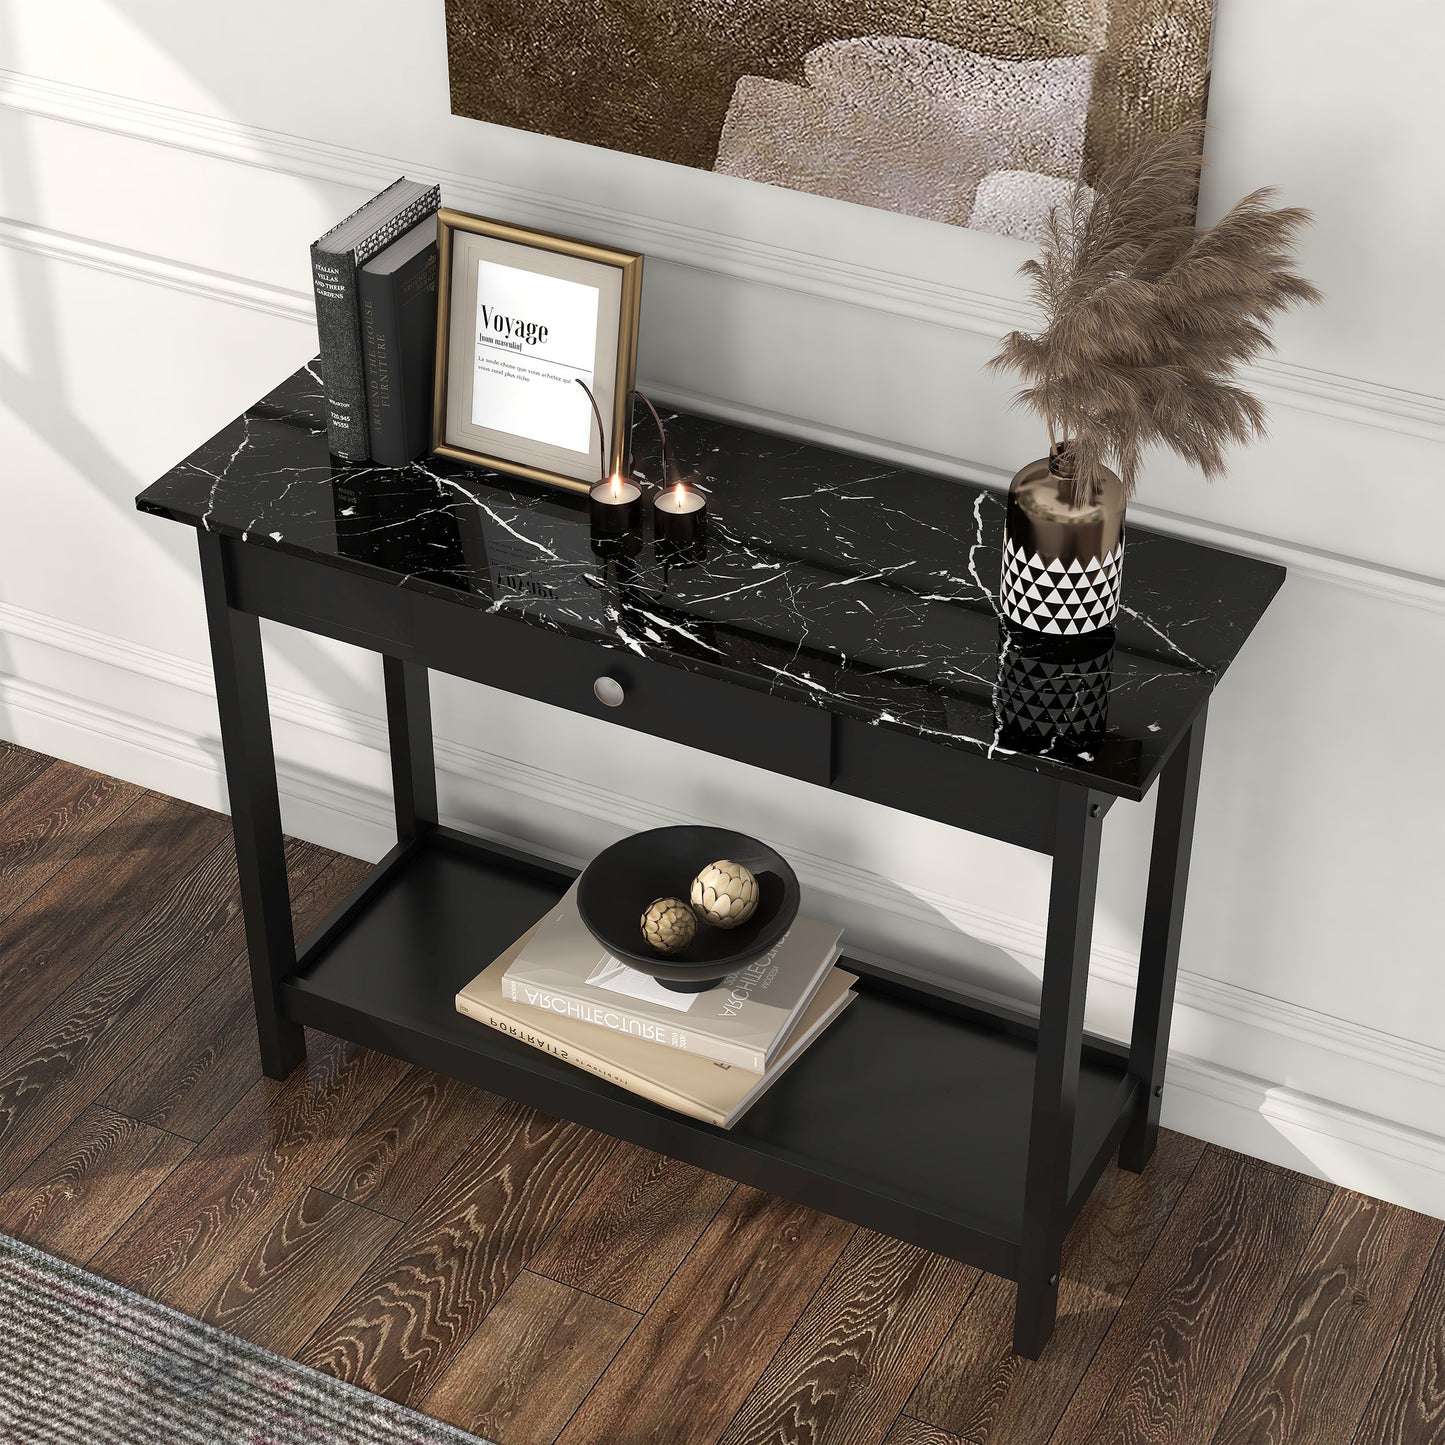 Left angled bird's eye view of a modern black and faux marble one-drawer console table with a lower shelf in a living area with accessories